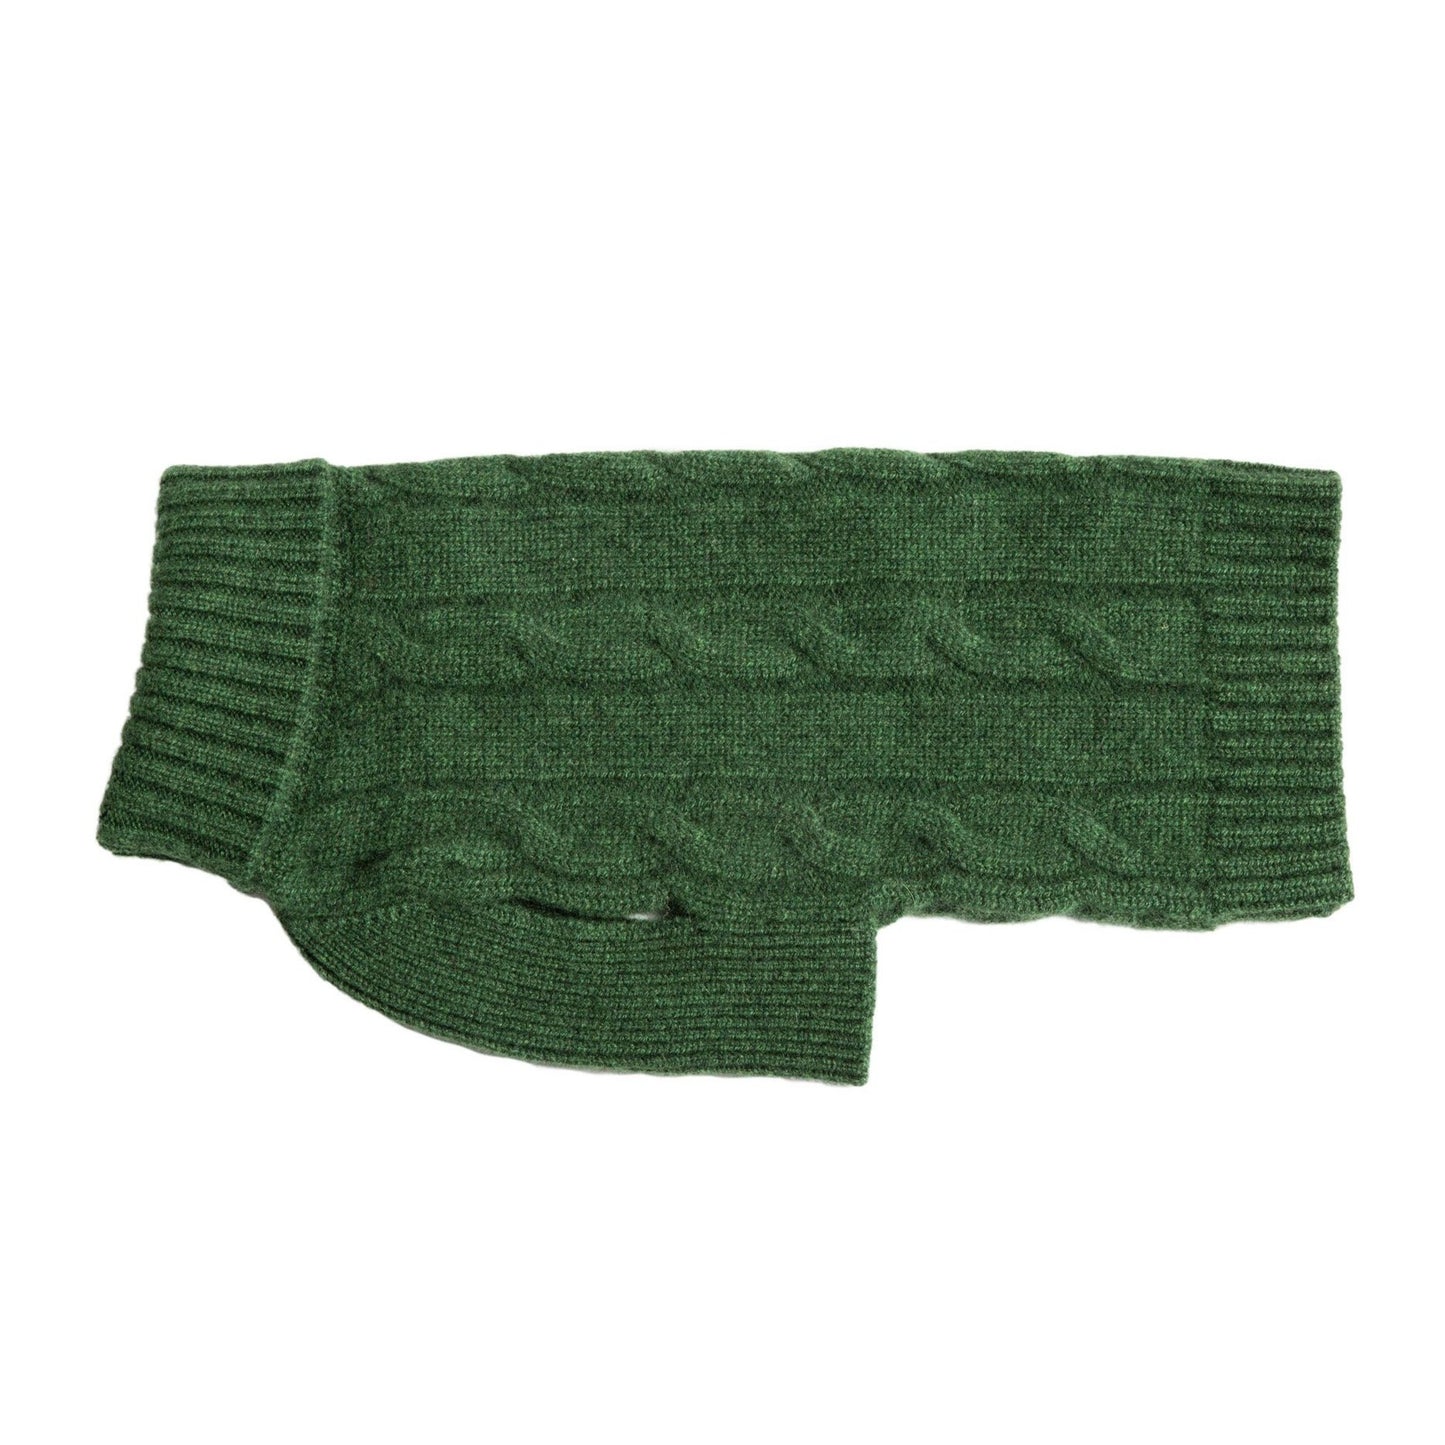 Cableknit Cashmere Dog Sweater, Green